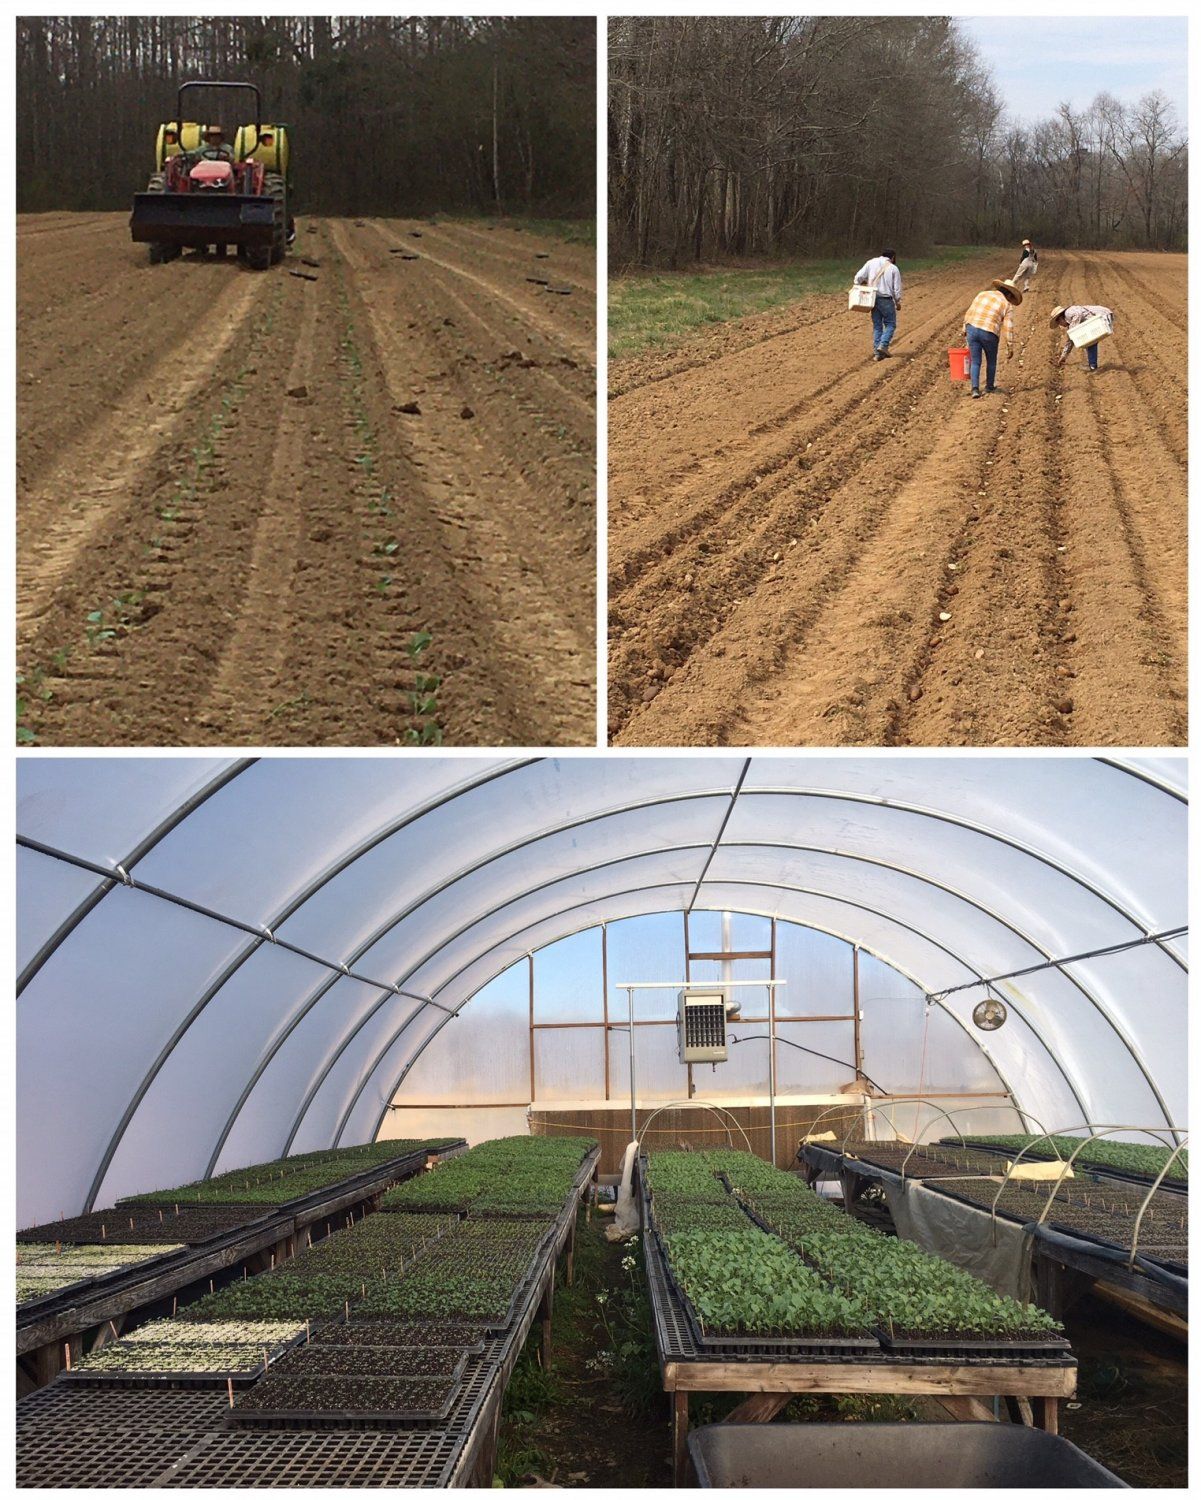 Farm Happenings for March 18, 2021